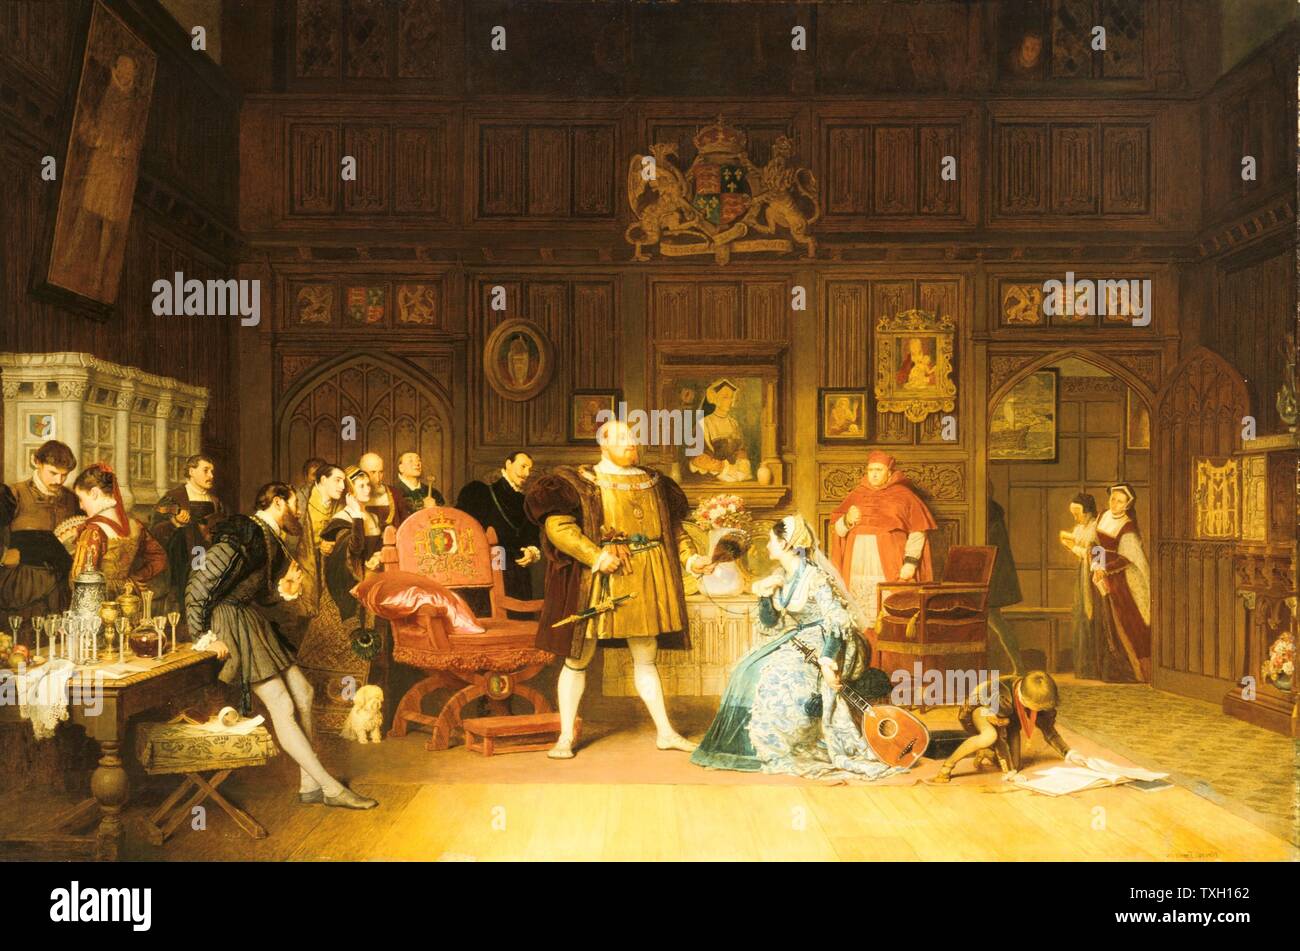 Marcus Stone (1840-1921) British history painter. 'Henry VIII and Anne Boleyn Observed by Queen Catherine' (Catherine of Aragon) , in doorway, whose portrait is on wall behind them. Anne has been playing the lute for the king watched by a gathering of courtiers . Cardinal Wolsey, right of centre, looks on.  The little dog, traditionally symbolising fidelity, is an ironic touch.  Oil on canvas. 1870. Private collection Stock Photo